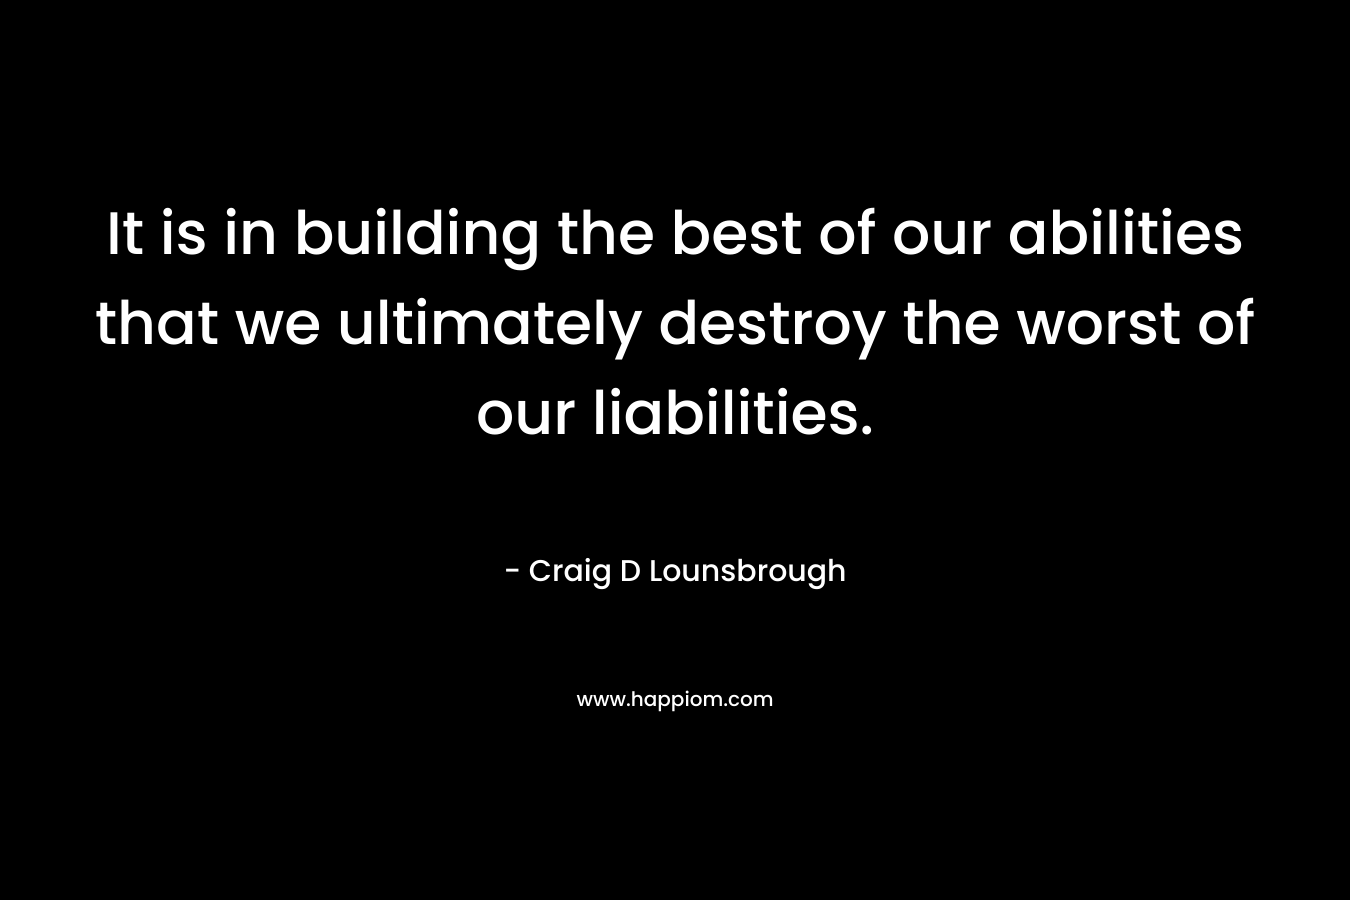 It is in building the best of our abilities that we ultimately destroy the worst of our liabilities.